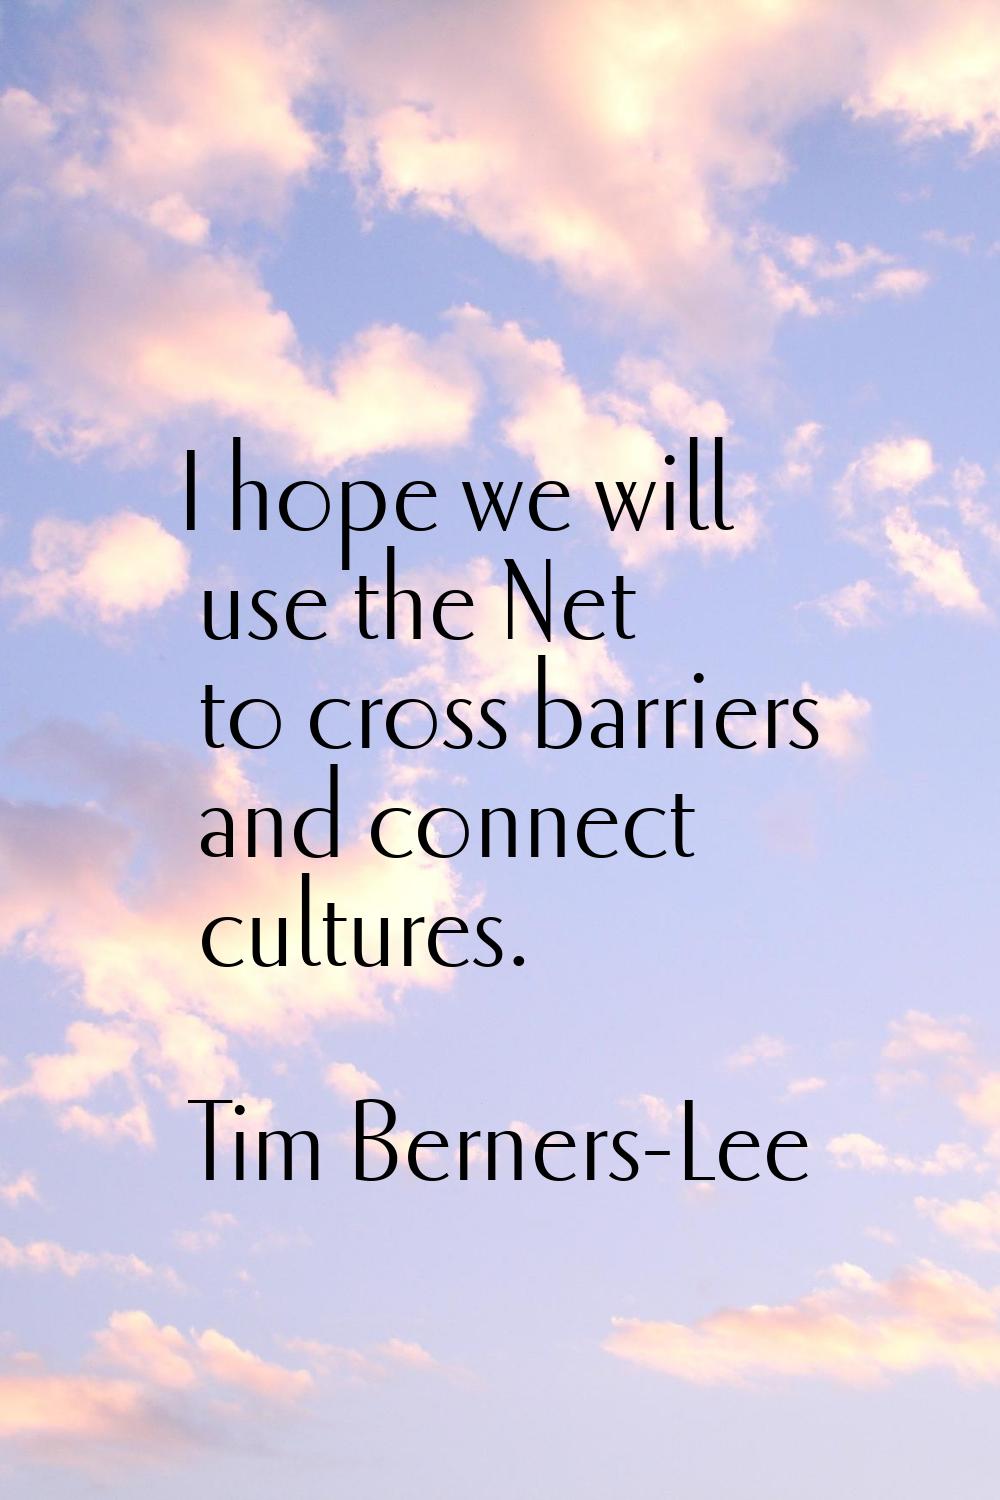 I hope we will use the Net to cross barriers and connect cultures.